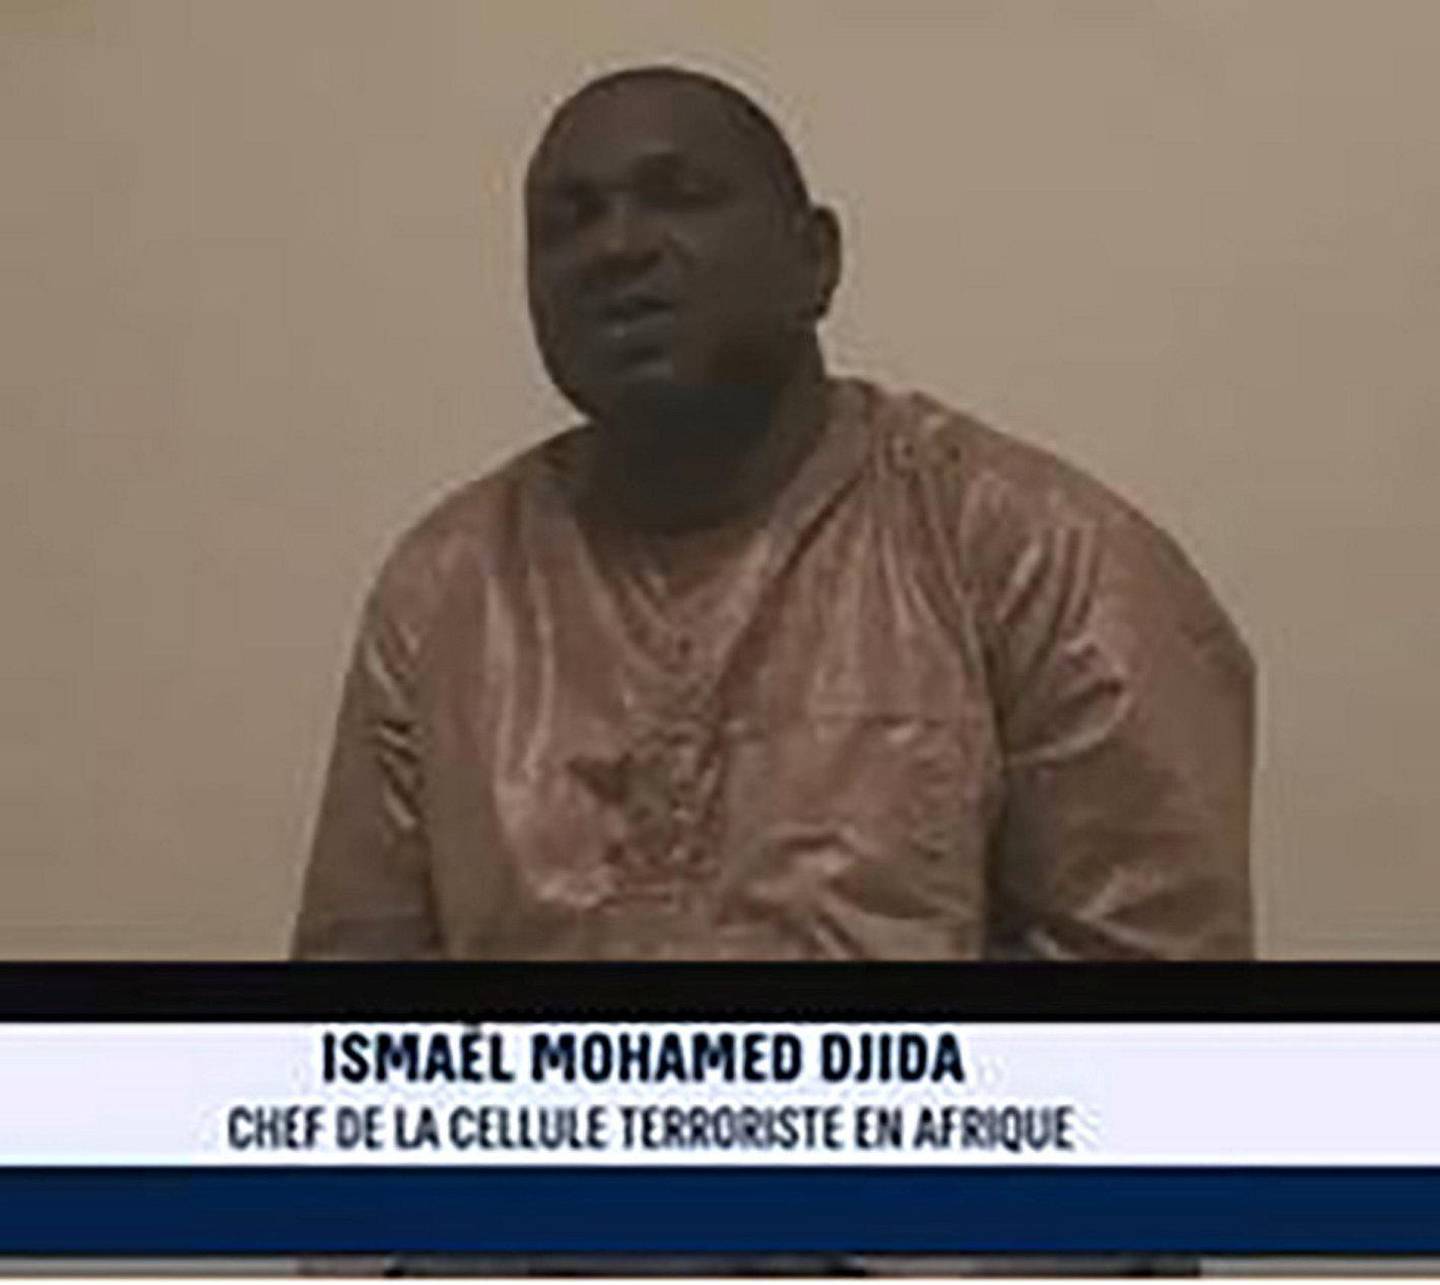 Djidah gives testimony 'in Chadian prison' first leaked and broadcast by a news channel in 2019